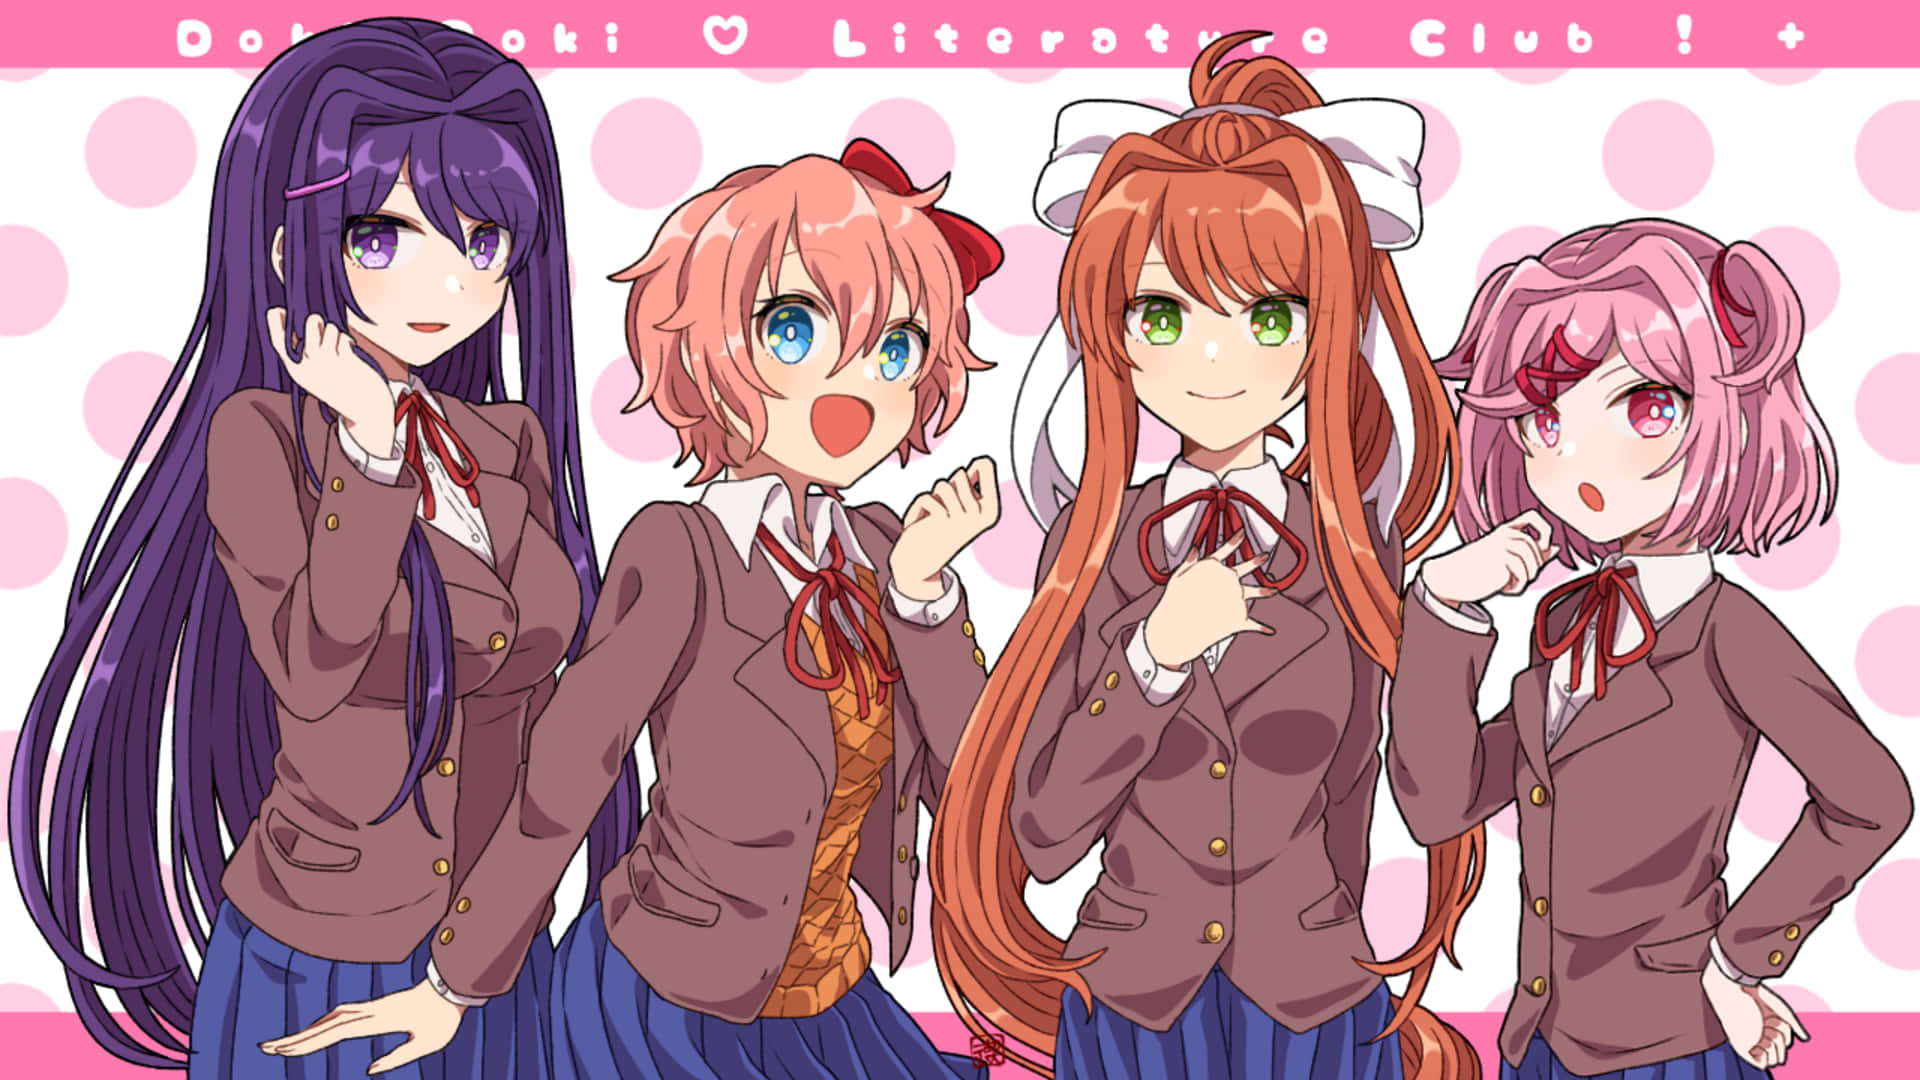 Friends come in all shapes, sizes, and styles in Doki Doki Wallpaper